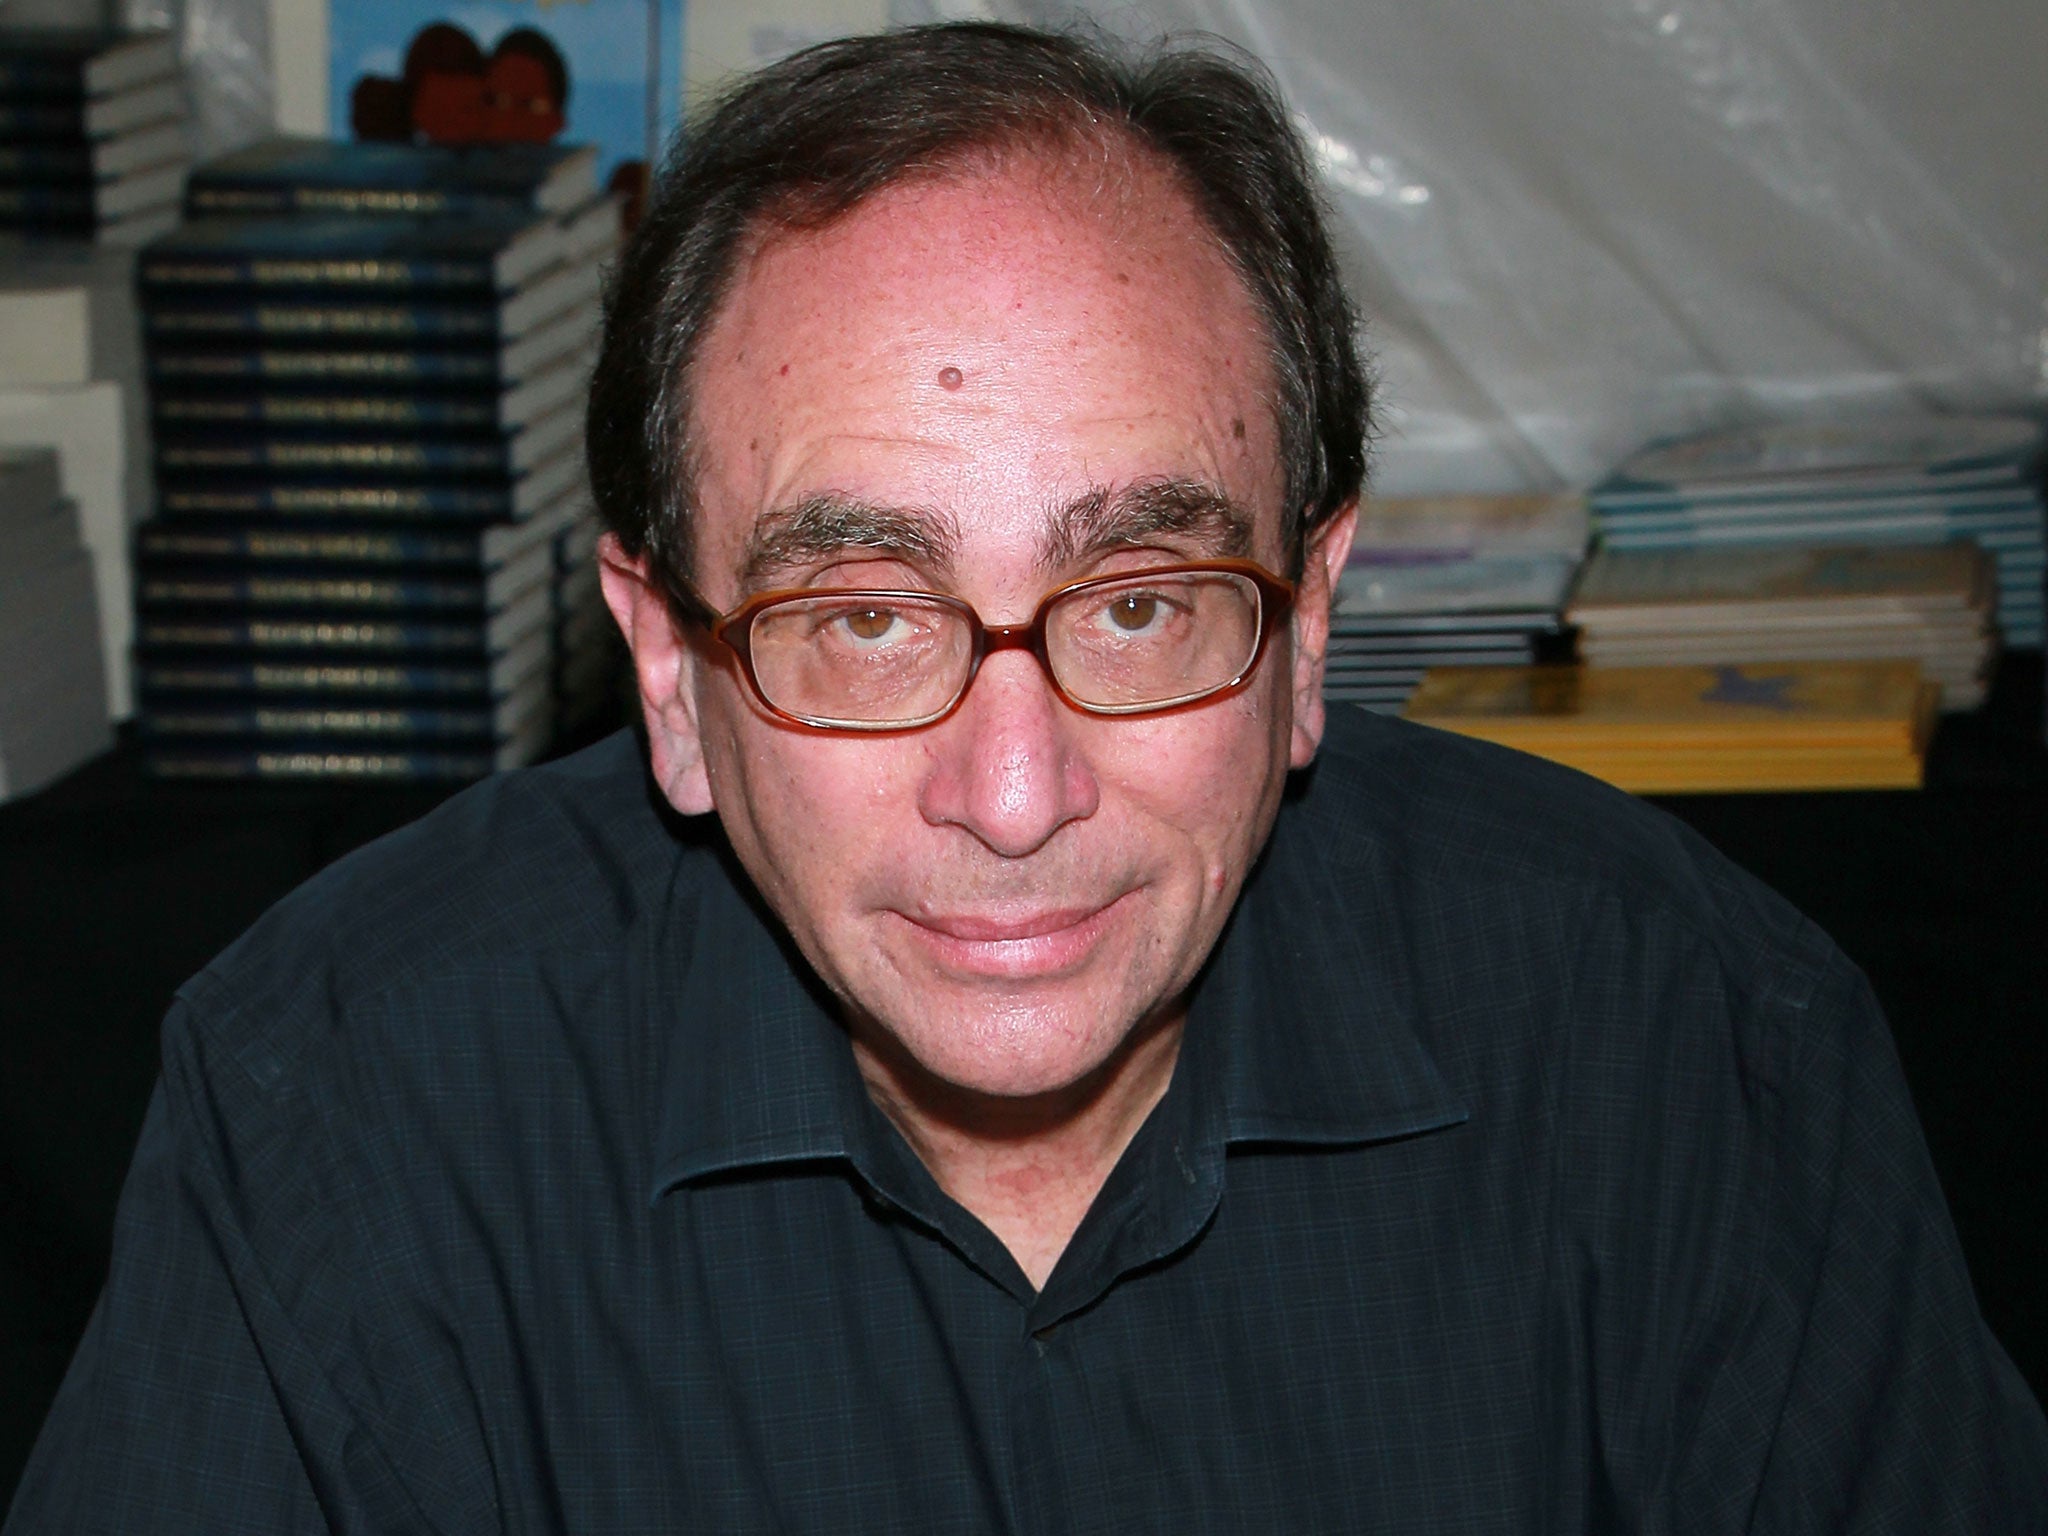 Goosebumps author RL Stine at a book signing